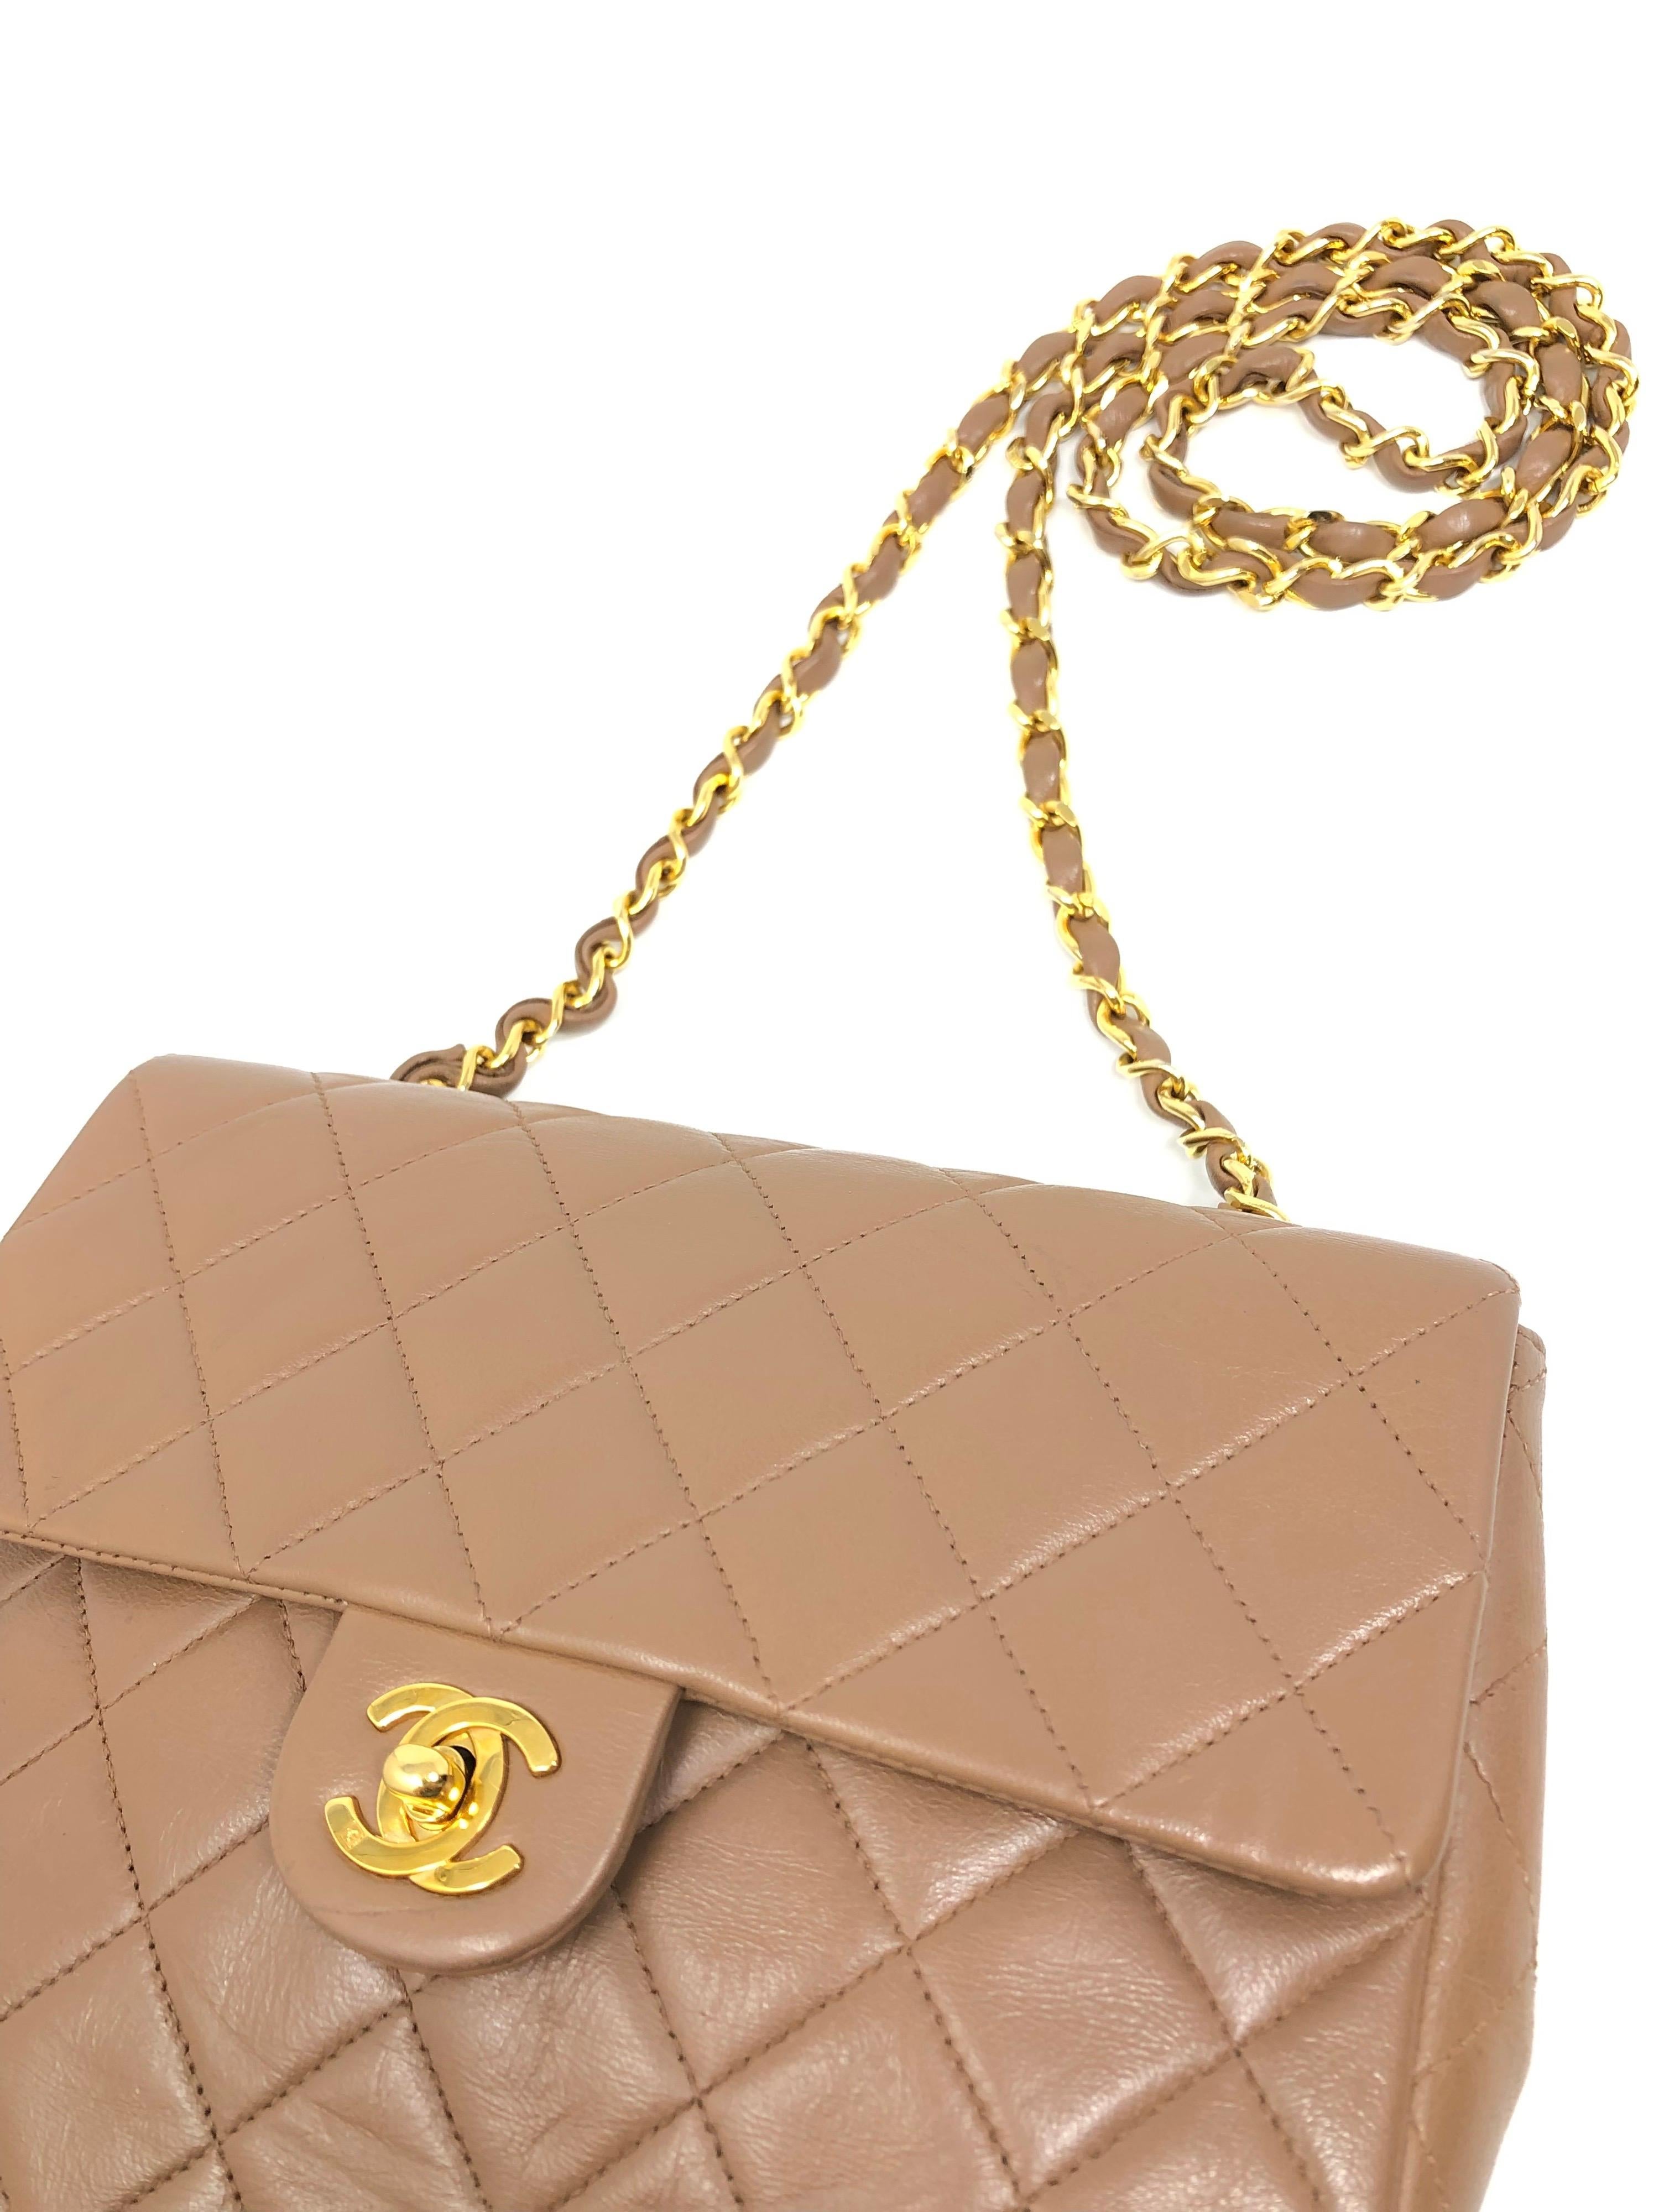 Women's Chanel Tan Quilted Leather Shoulder Bag 1989-1991